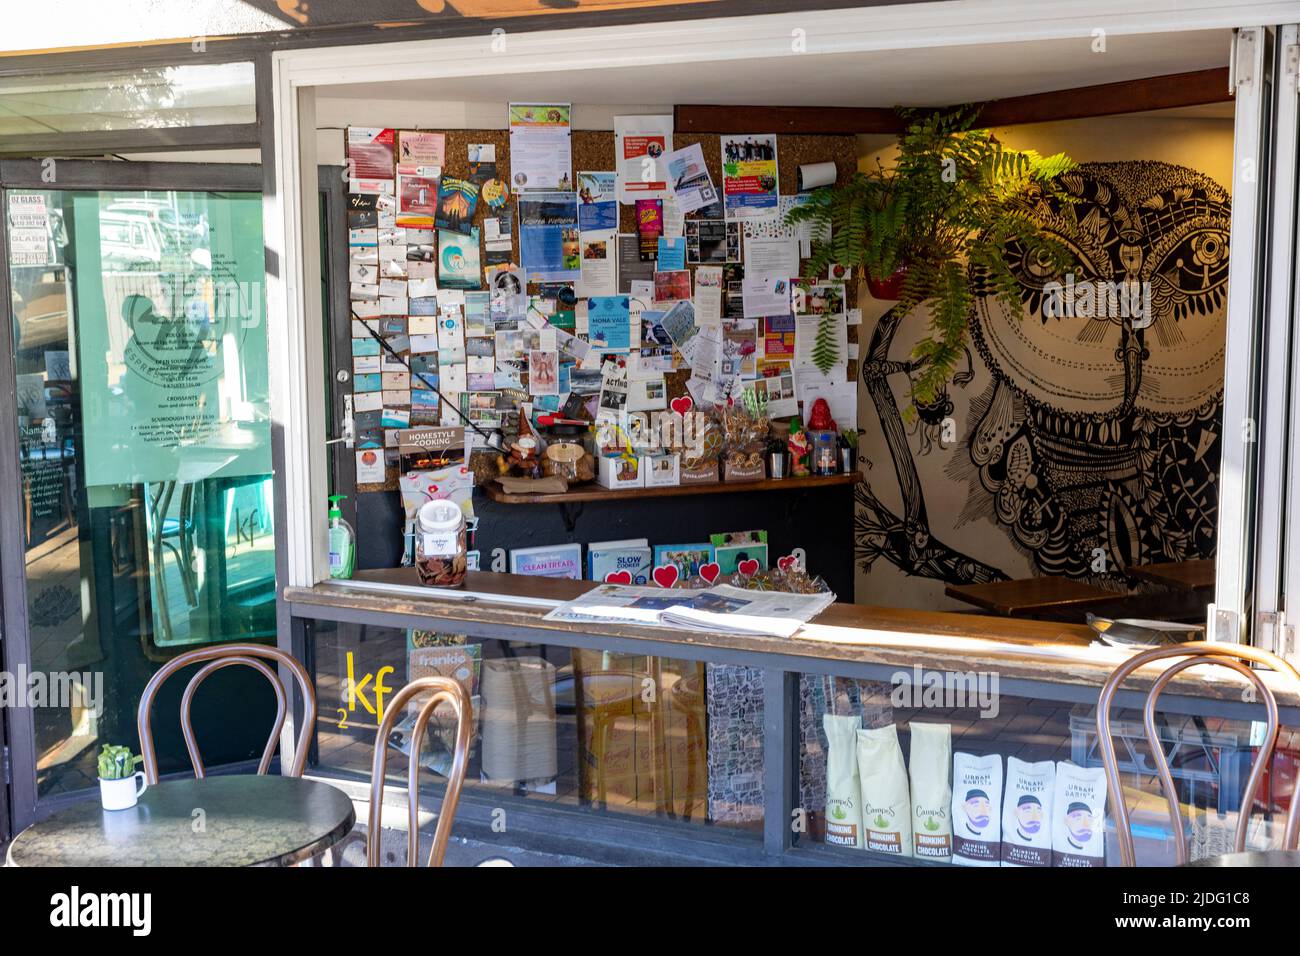 Australian cafe and coffee shop with a pin noticeboard inside for flyers, business cards and public notices,Sydney,NSW,Australia Stock Photo